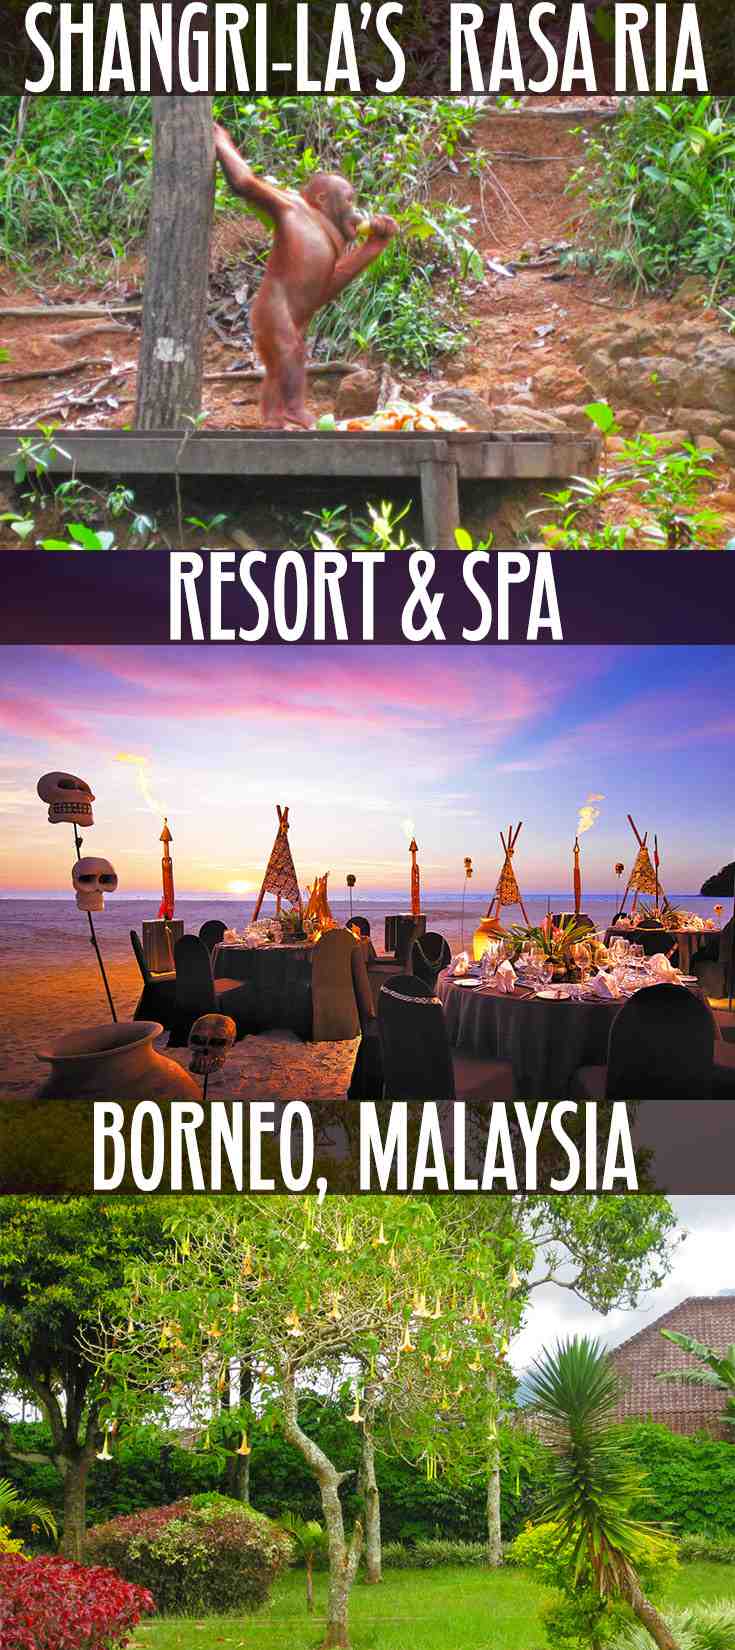 Shangri-La’s Rasa Ria Resort & Spa, Malaysia – WhodoIdo: A beautiful luxury 5 star hotel located amidst 400 acres of tropical rainforest with views of the secluded Pantai Dalit beach. There’s 5 restaurants and 2 bars on site. Why not explore the Nature Reserve, walk along the tree top canopy or arrange a champagne breakfast with views of Mount Kinabalu!